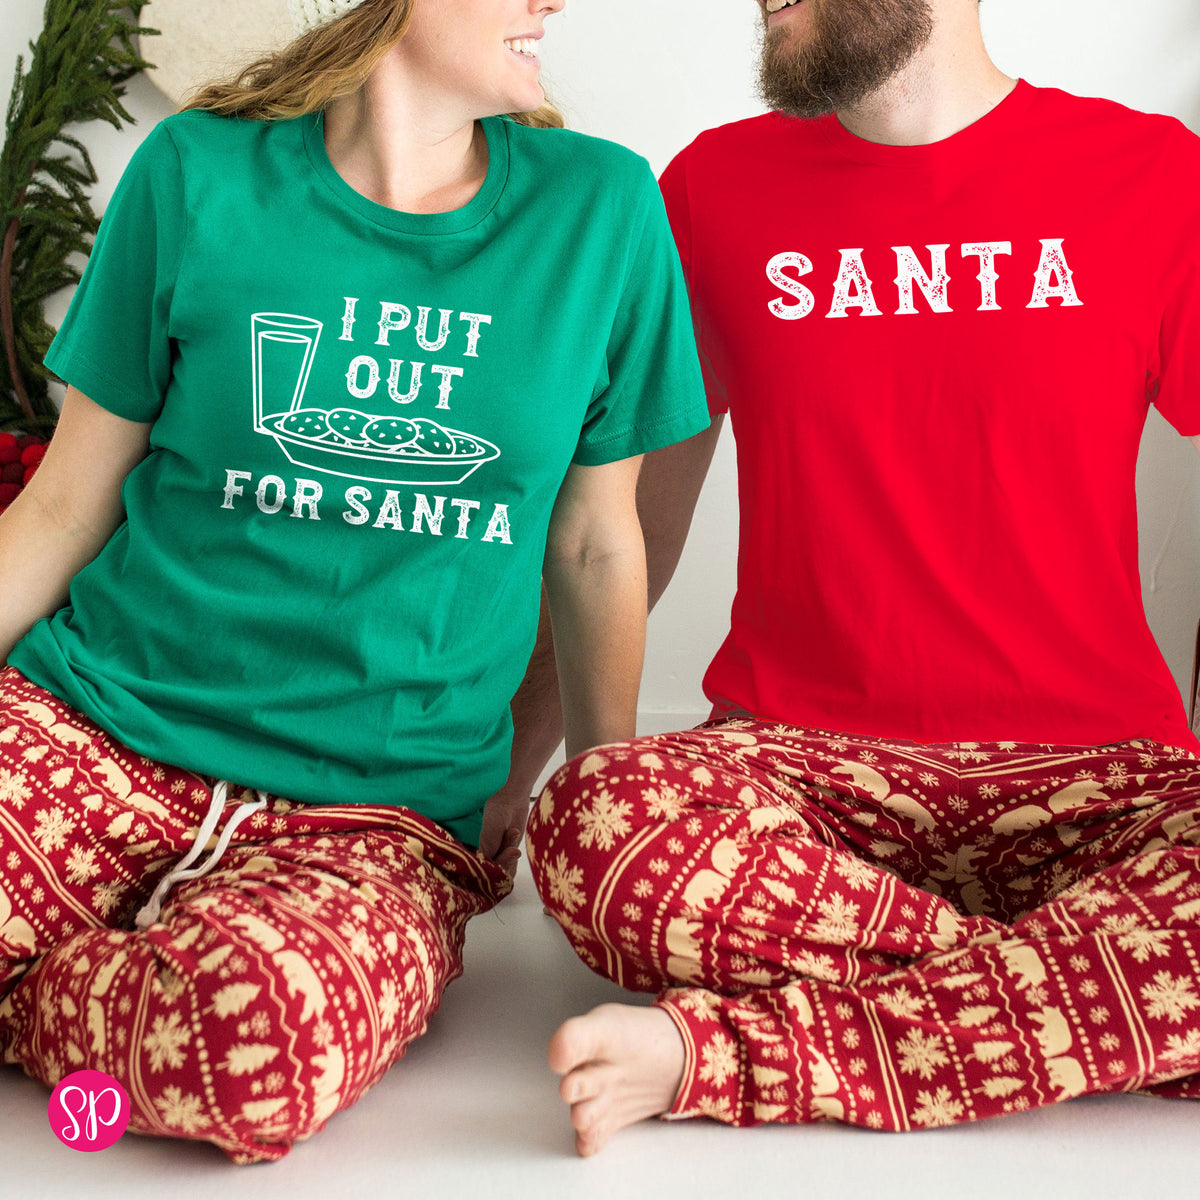 Couples Matching Christmas Shirts I Put Out for Santa Milk and Cookies